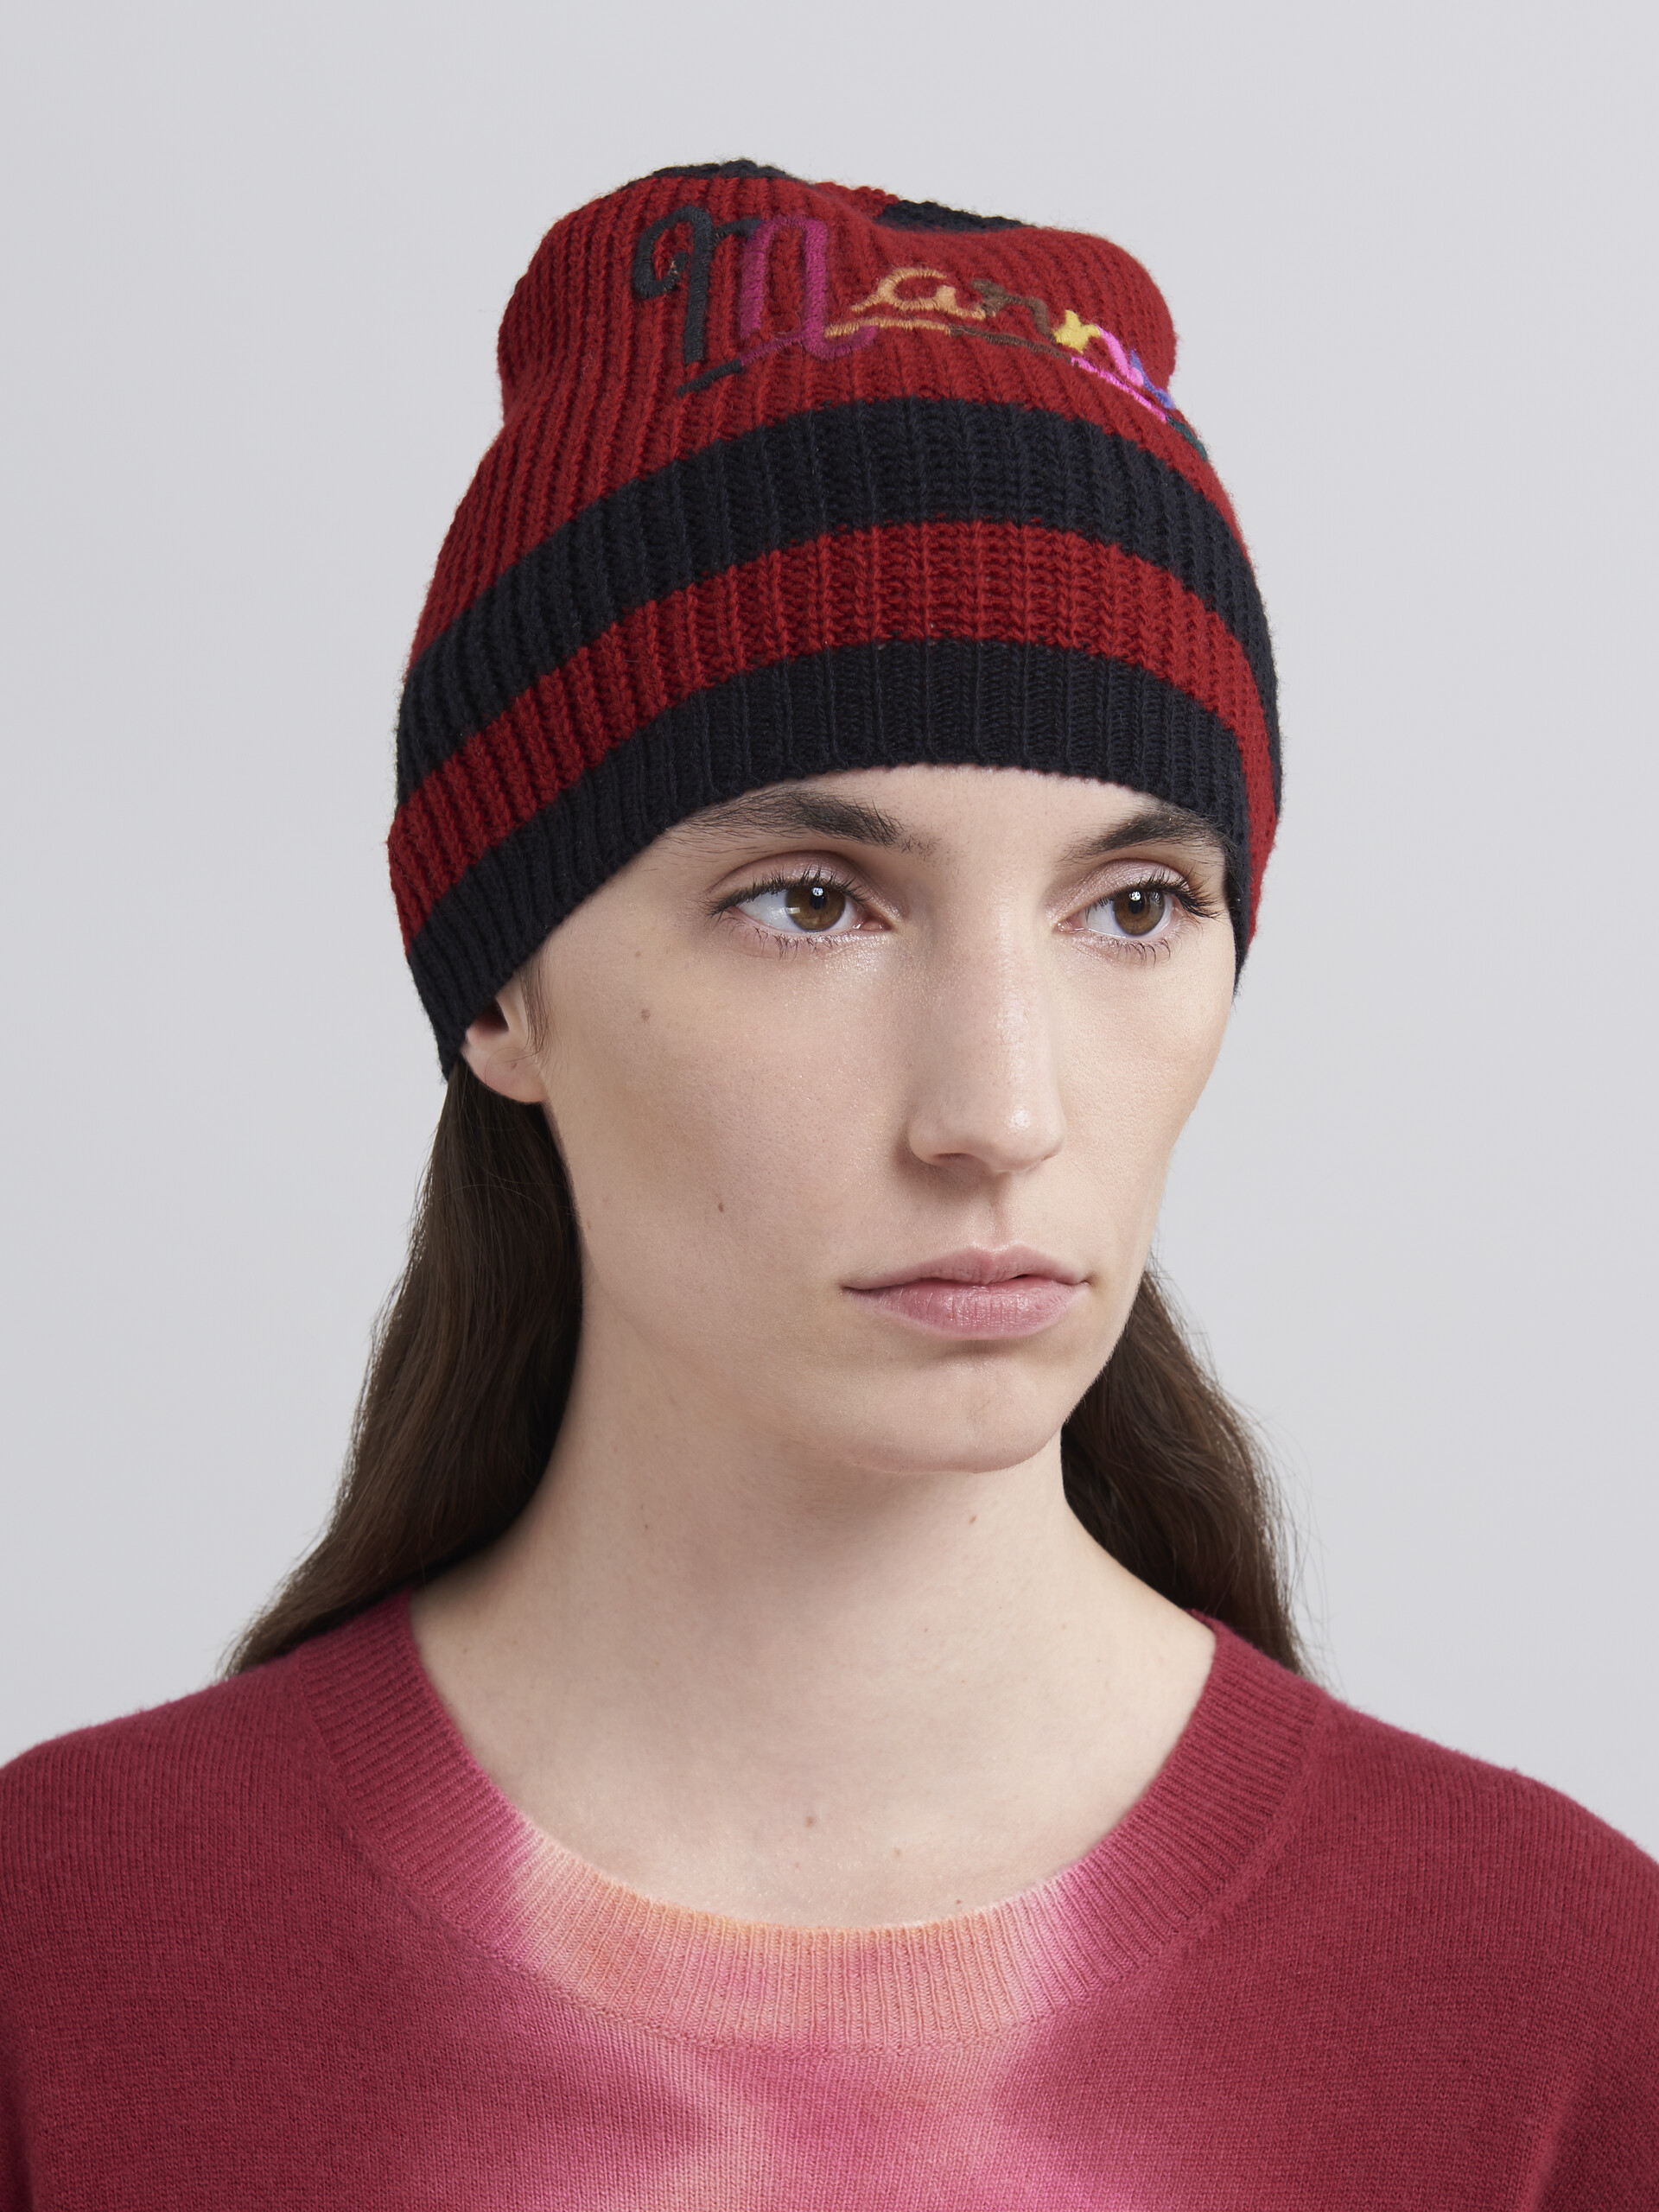 Black and red Shetland beanie - Hats - Image 2